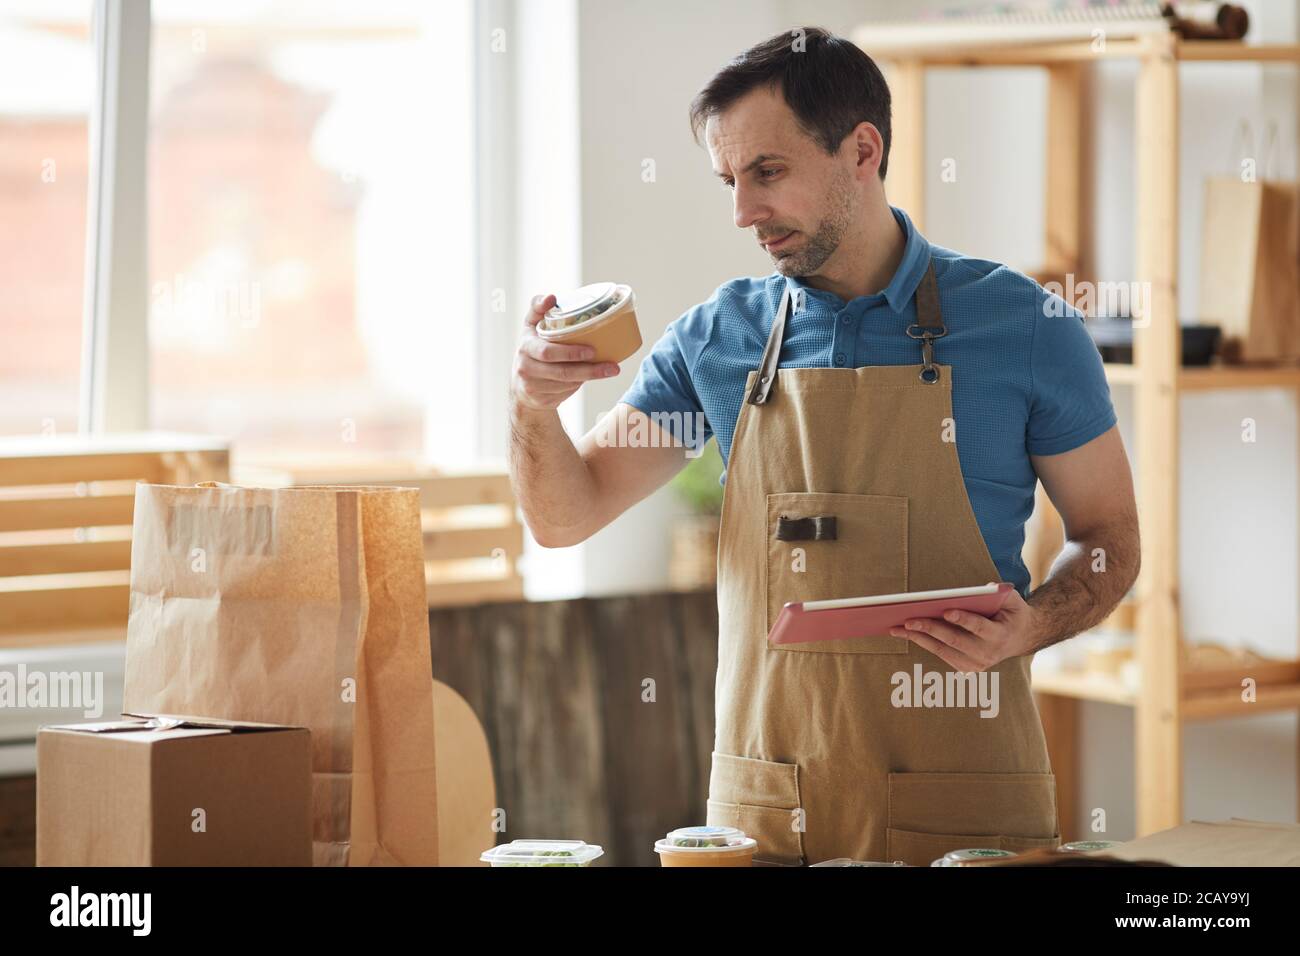 Waist up portrait of mature man wearing apron packaging orders while standing by wooden table, food delivery service worker, copy space Stock Photo